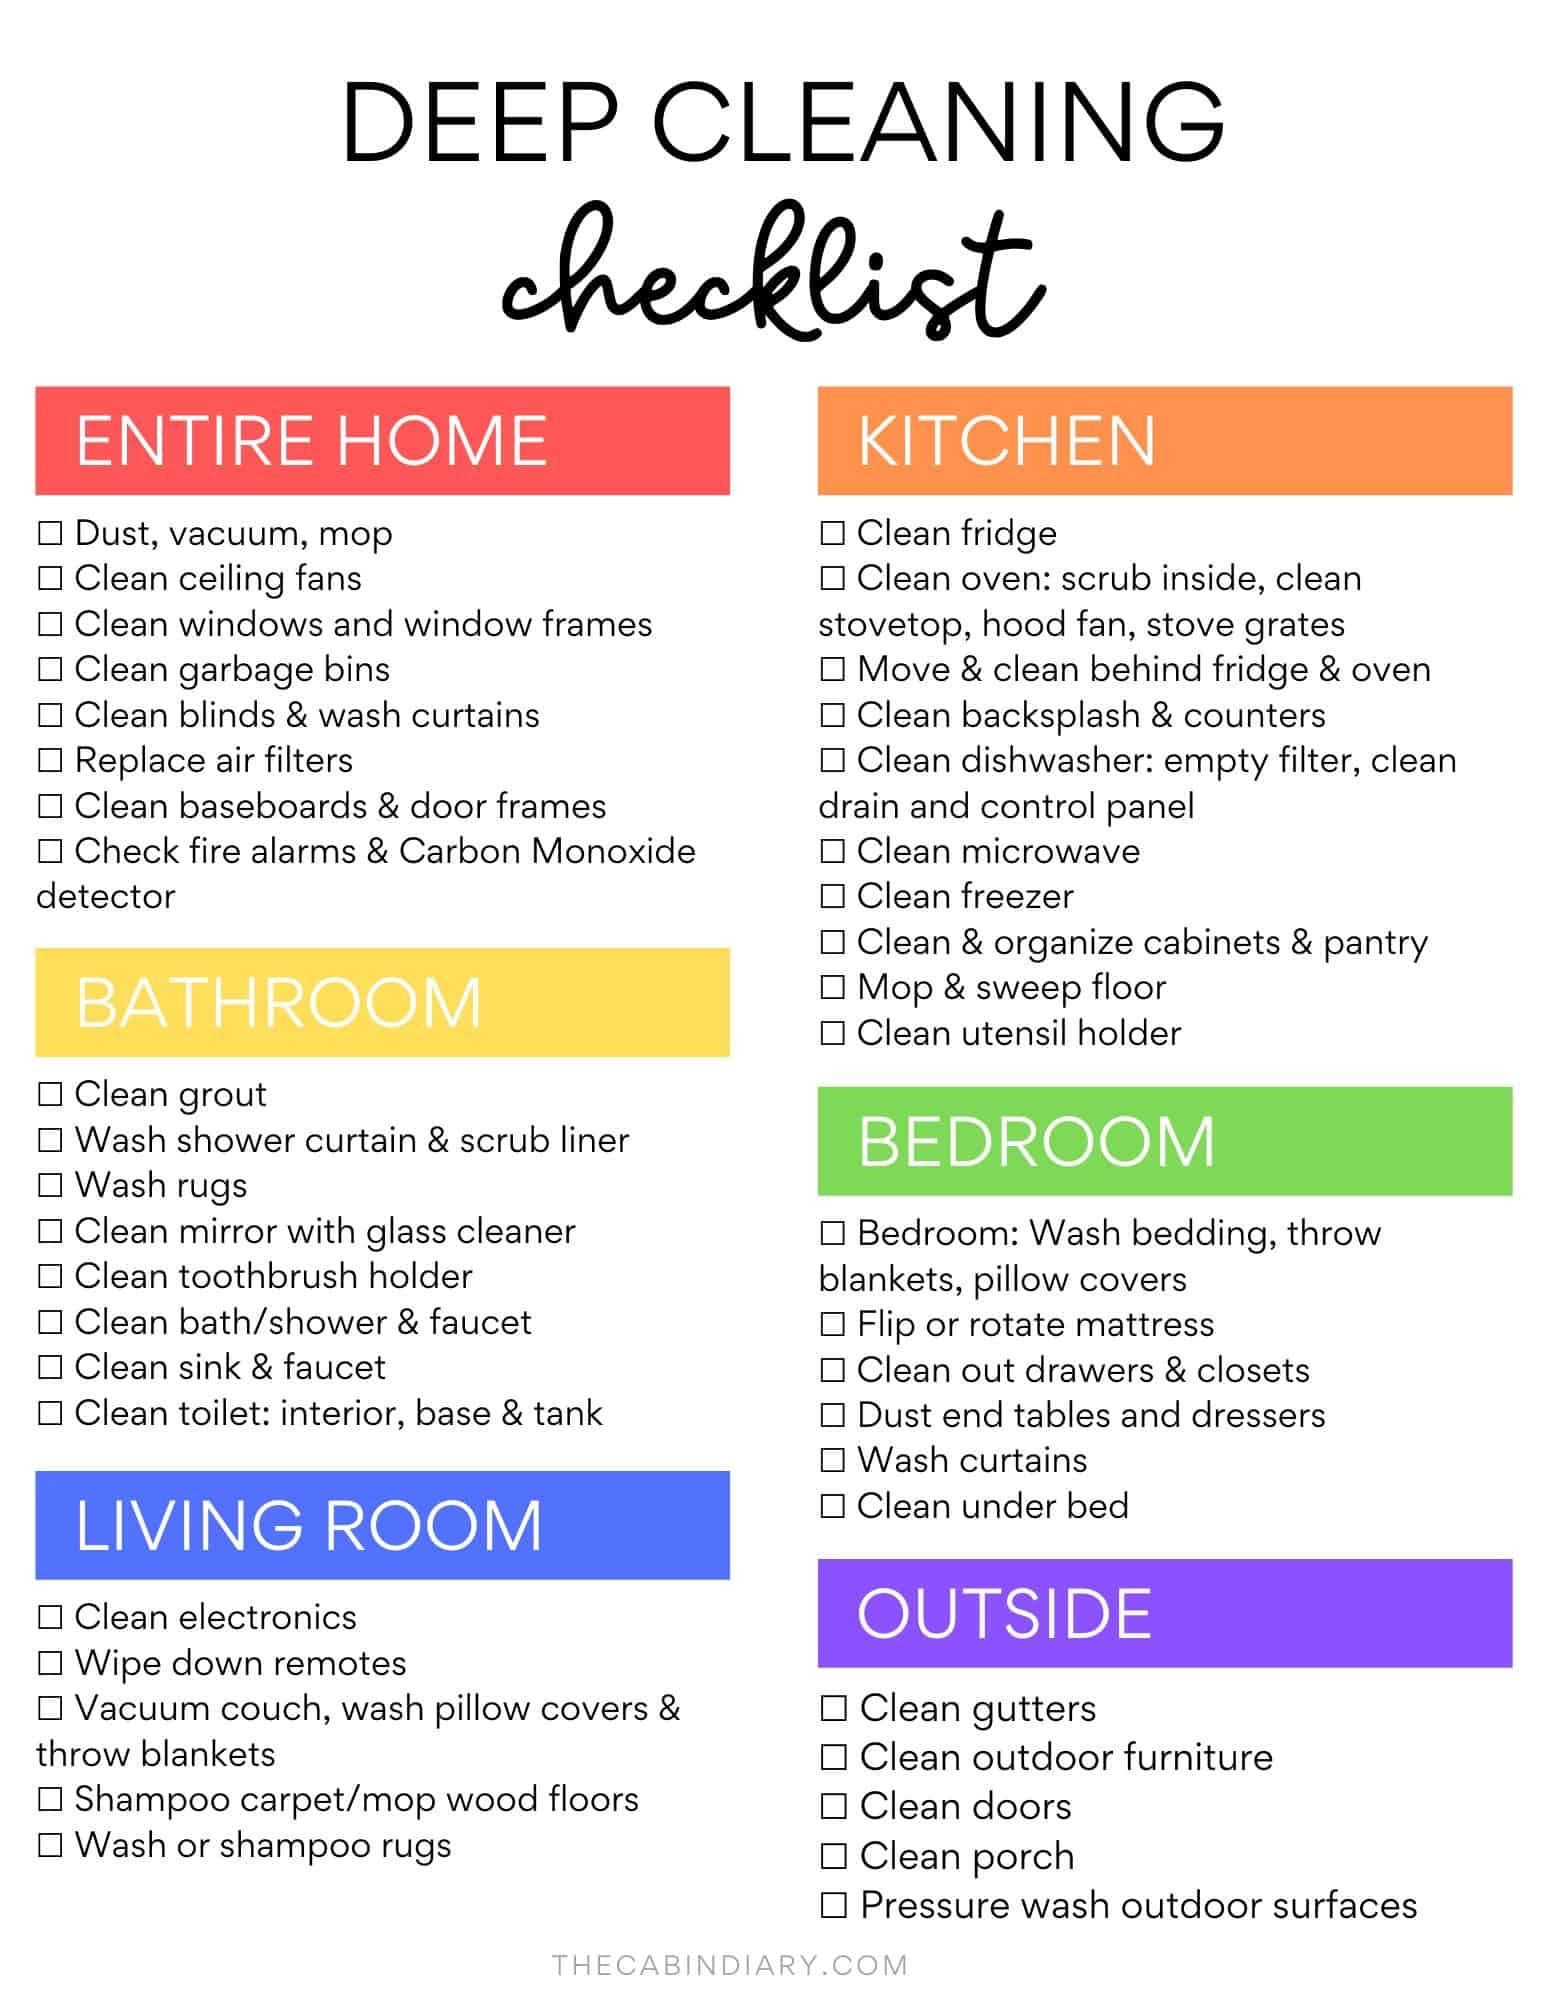 http://www.thecabindiary.com/wp-content/uploads/2020/06/Deep-Cleaning-Checklist-1.jpg